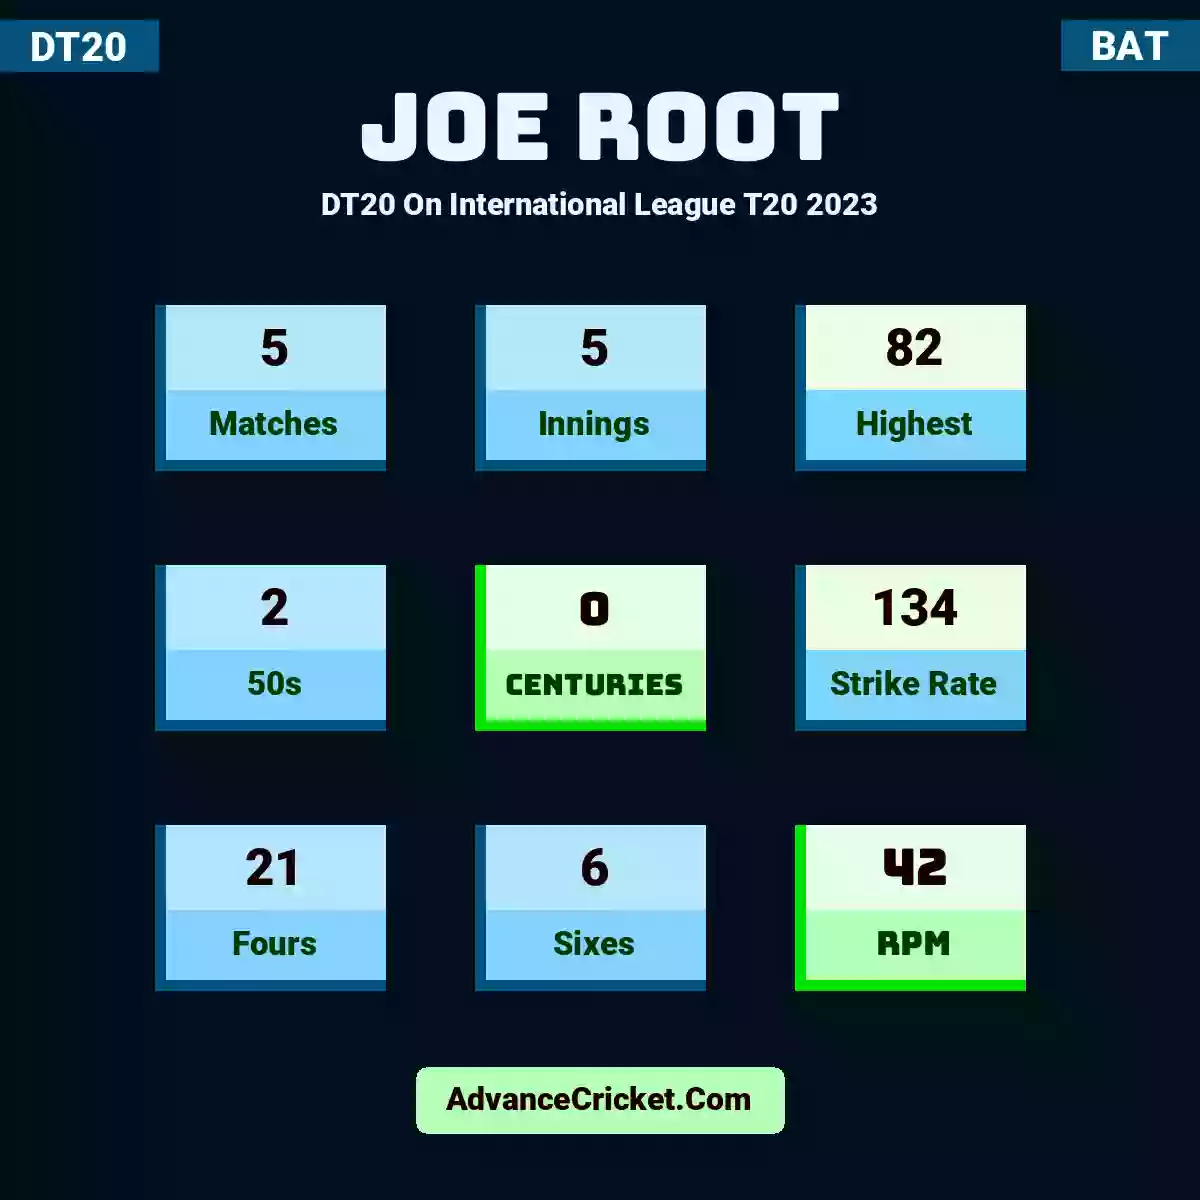 Joe Root DT20  On International League T20 2023, Joe Root played 5 matches, scored 82 runs as highest, 2 half-centuries, and 0 centuries, with a strike rate of 134. J.Root hit 21 fours and 6 sixes, with an RPM of 42.